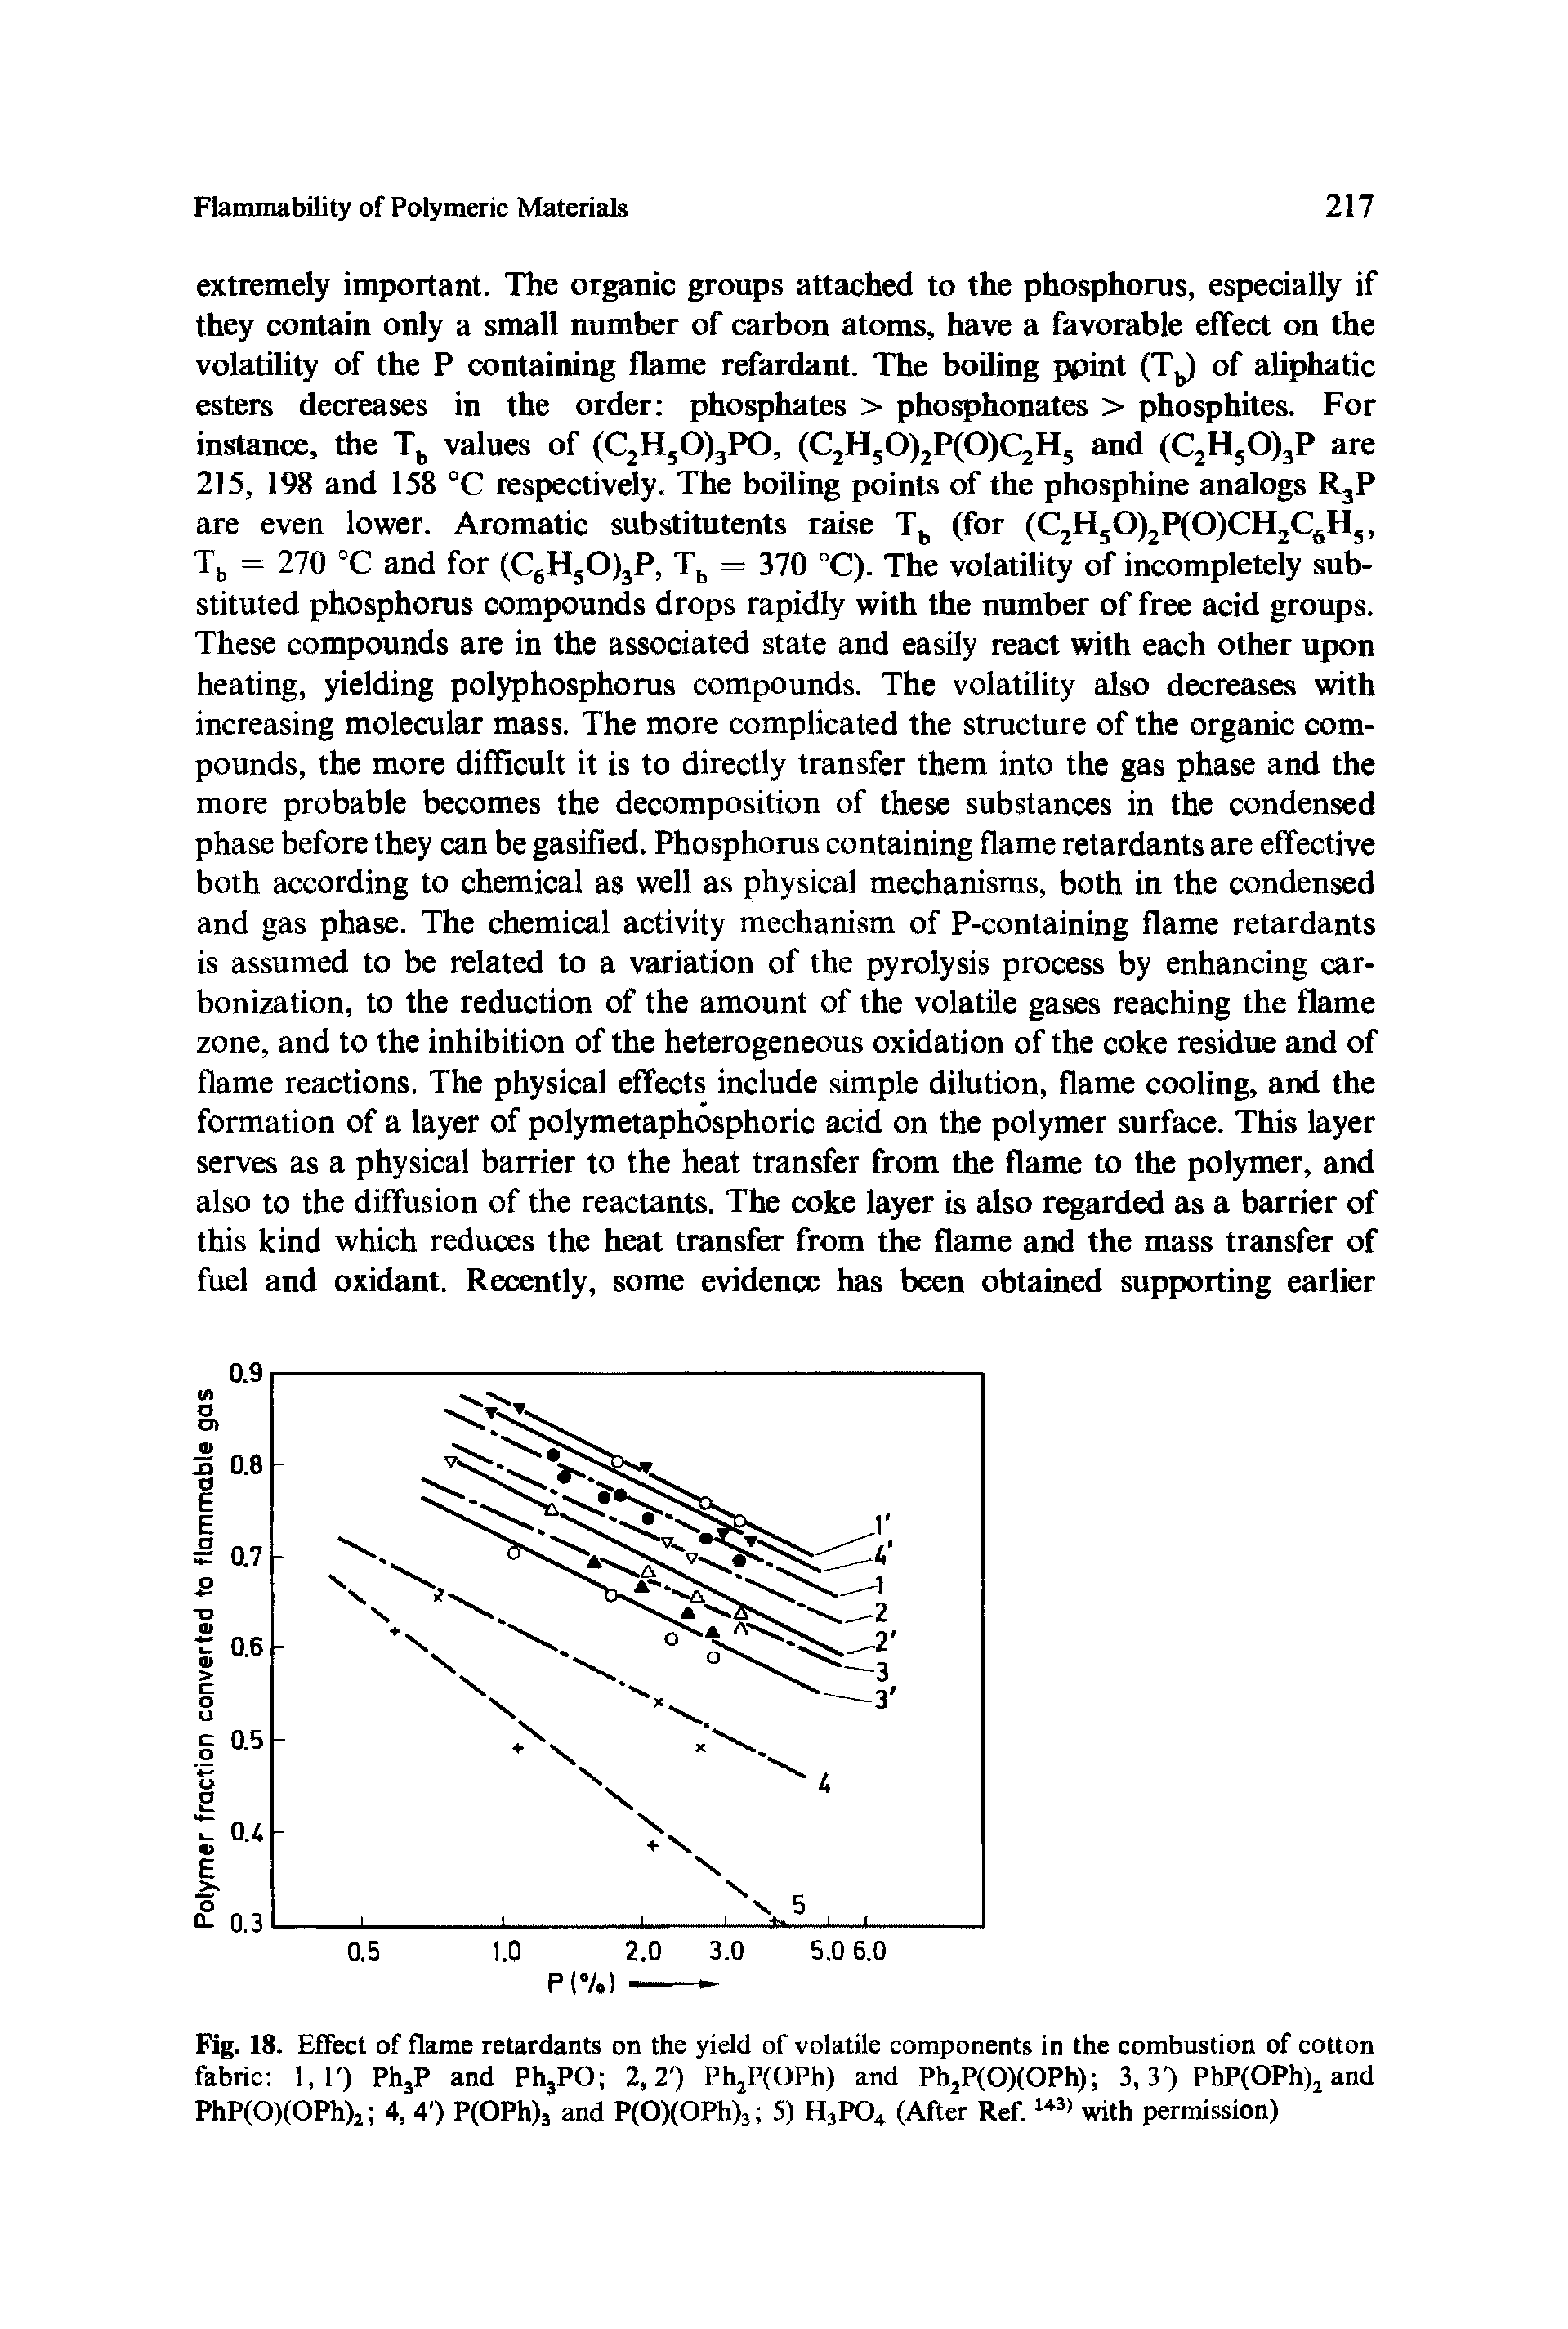 Fig. 18. Effect of flame retardants on the yield of volatile components in the combustion of cotton fabric 1,1 ) PhjP and PhjPO 2,2 ) PhjP(OPh) and PhjP(0)(0Ph) 3,3 ) PhP(OPh)jand PhP(0)(0Ph)2 4, 4 ) P(OPh)3 and P(OXOPh)3 5) H3PO4 (After Ref. with permission)...